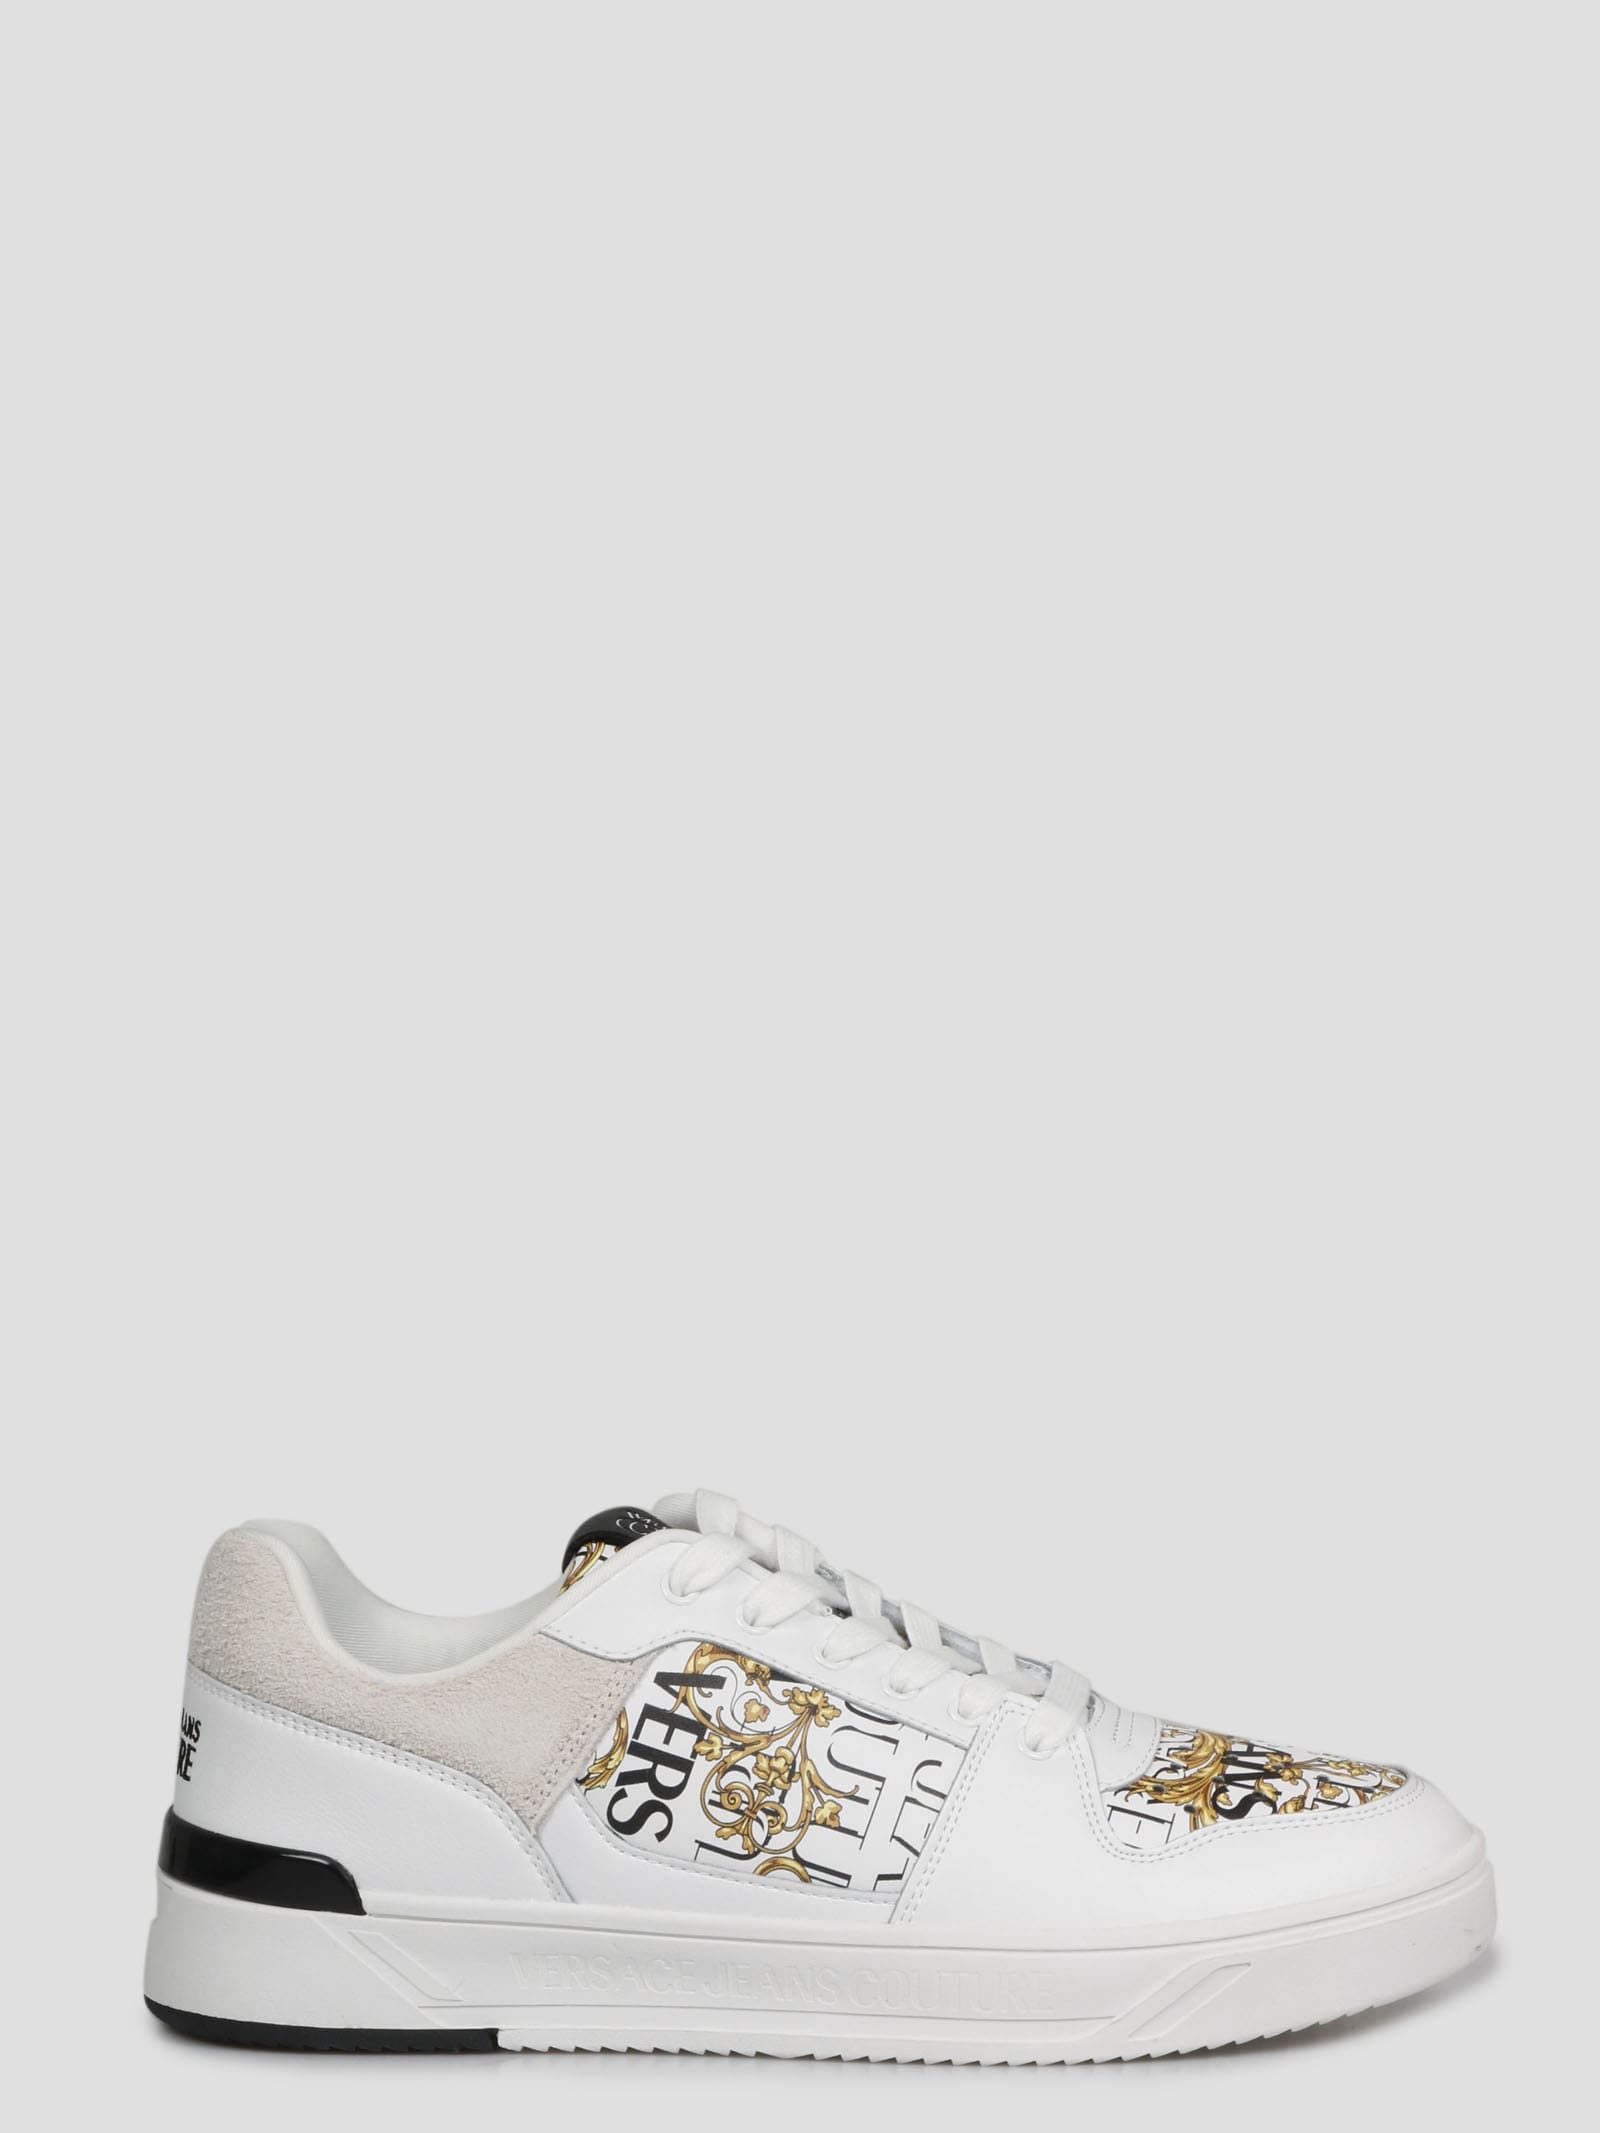 VERSACE JEANS COUTURE STARLIGHT LOGO COUTURE SNEAKERS